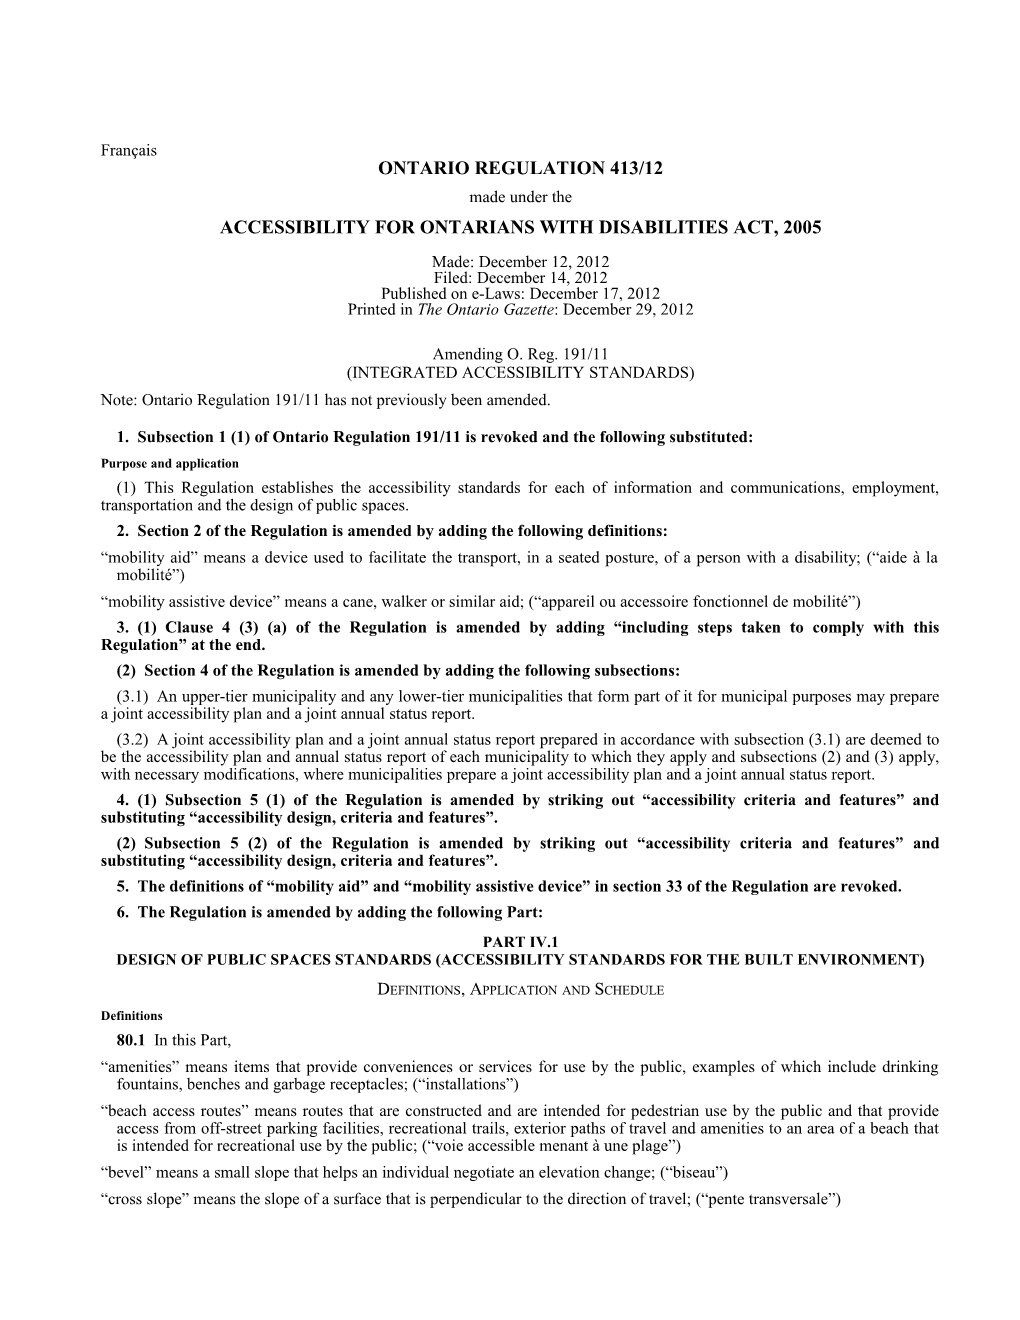 ACCESSIBILITY for ONTARIANS with DISABILITIES ACT, 2005 - O. Reg. 413/12